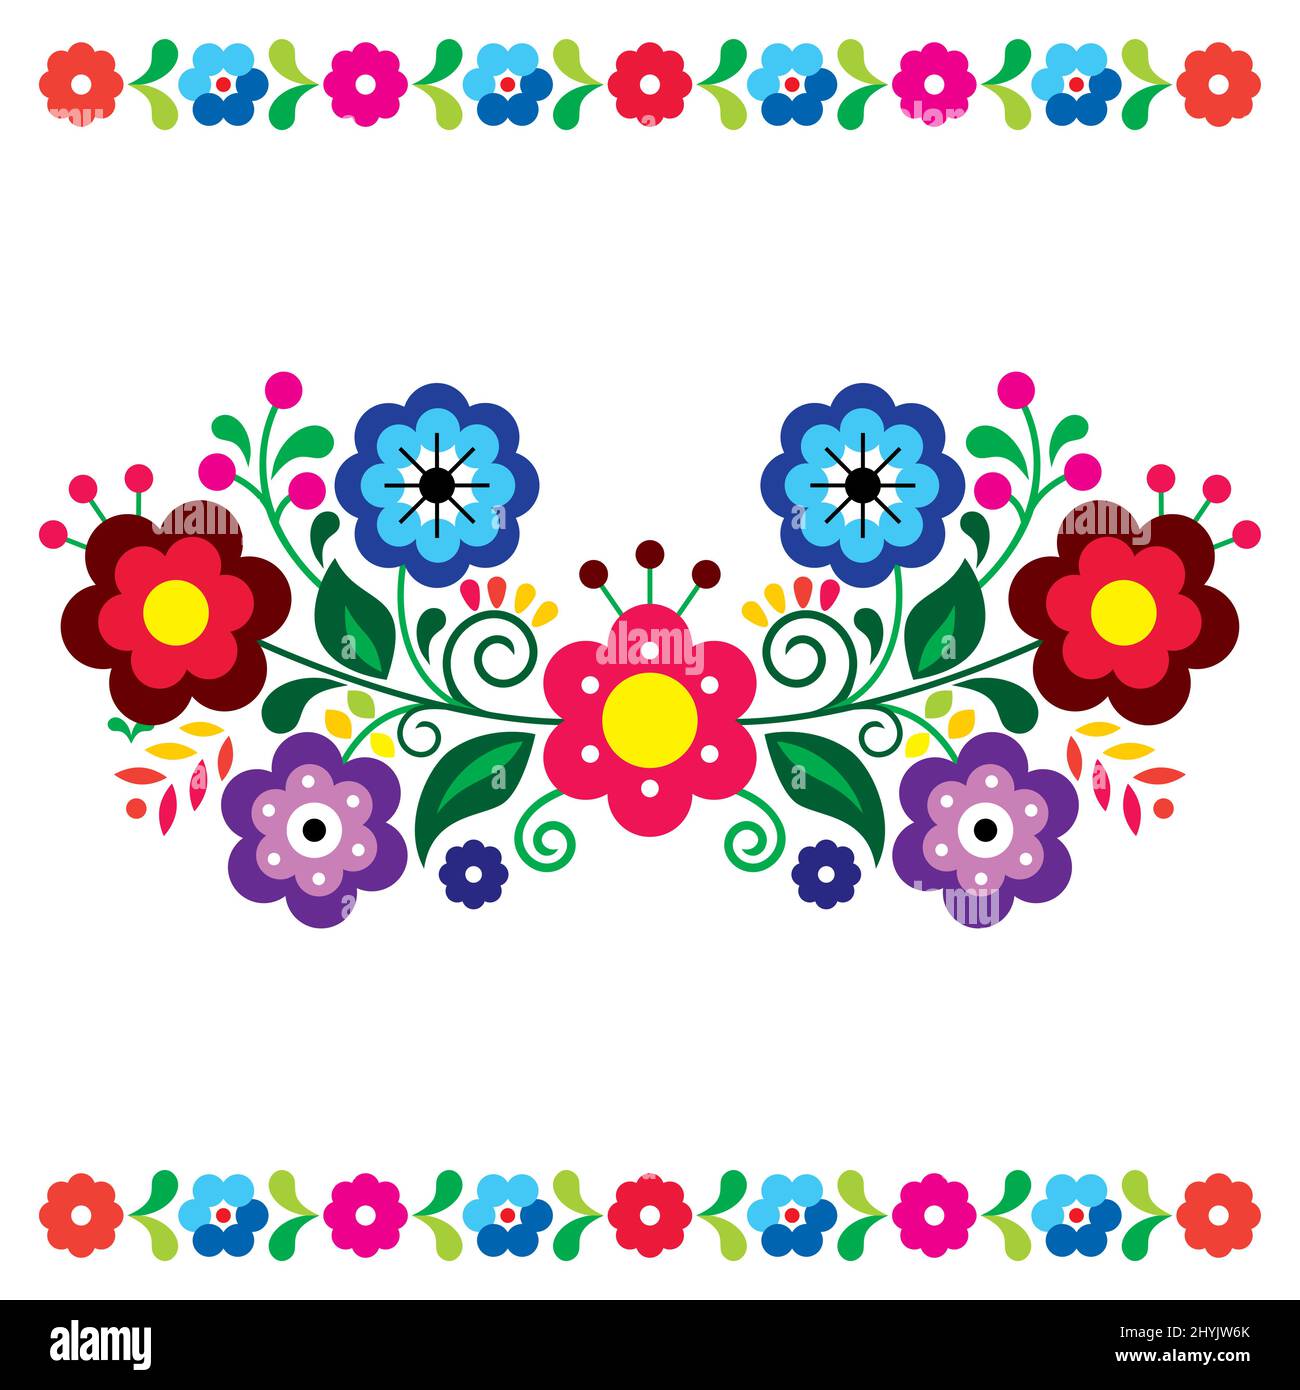 Mexican handmade craft Stock Vector Images - Alamy